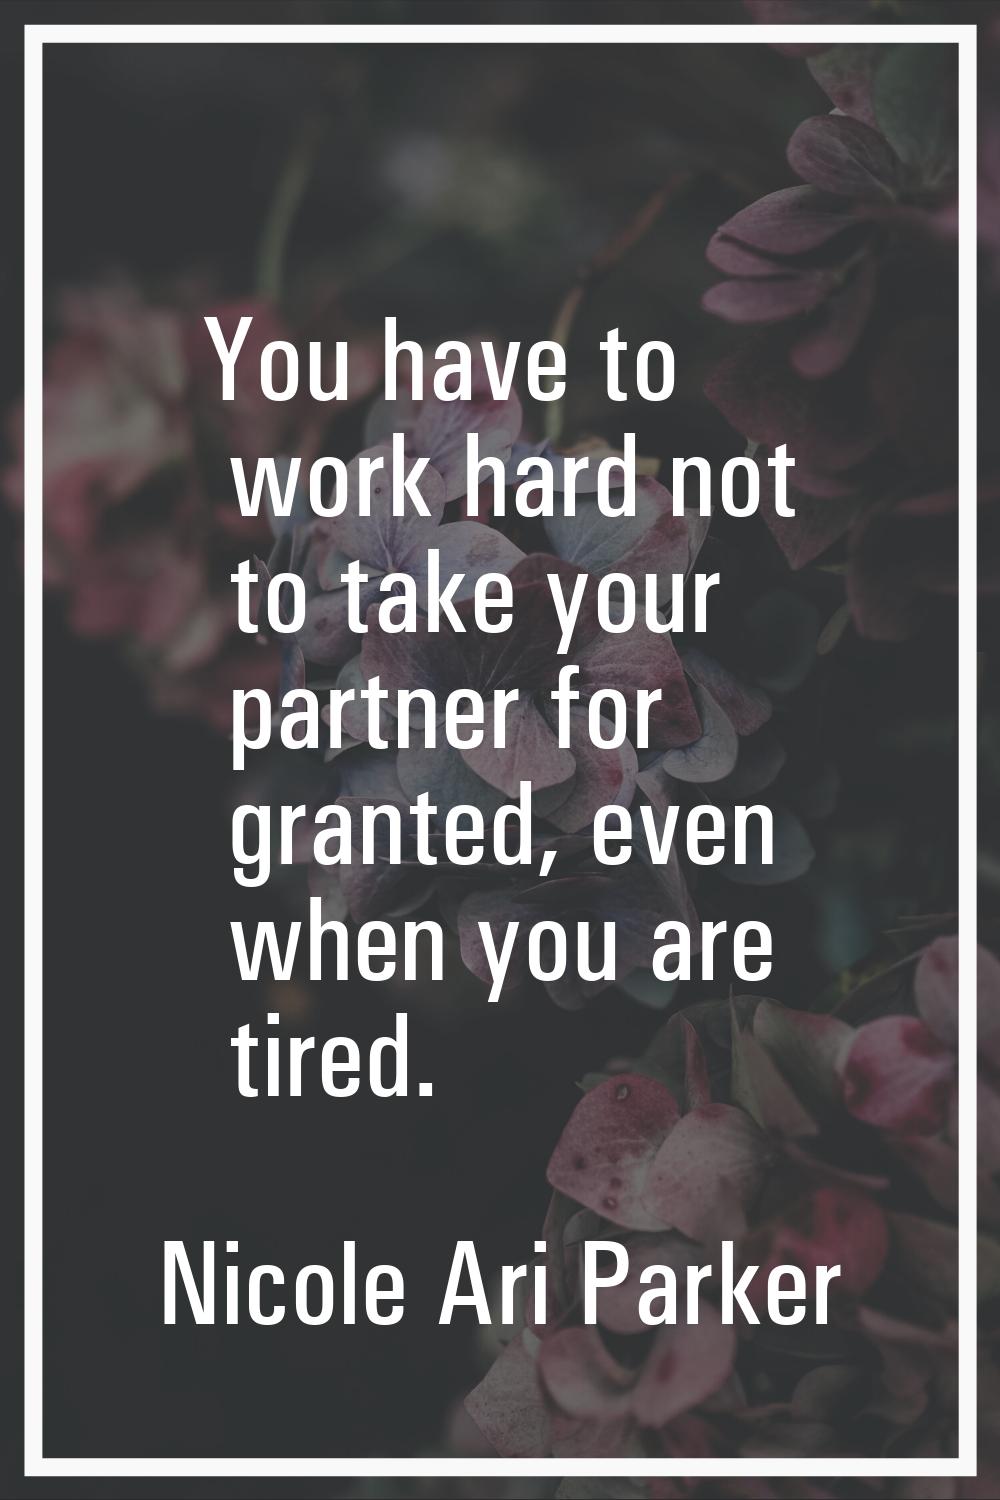 You have to work hard not to take your partner for granted, even when you are tired.